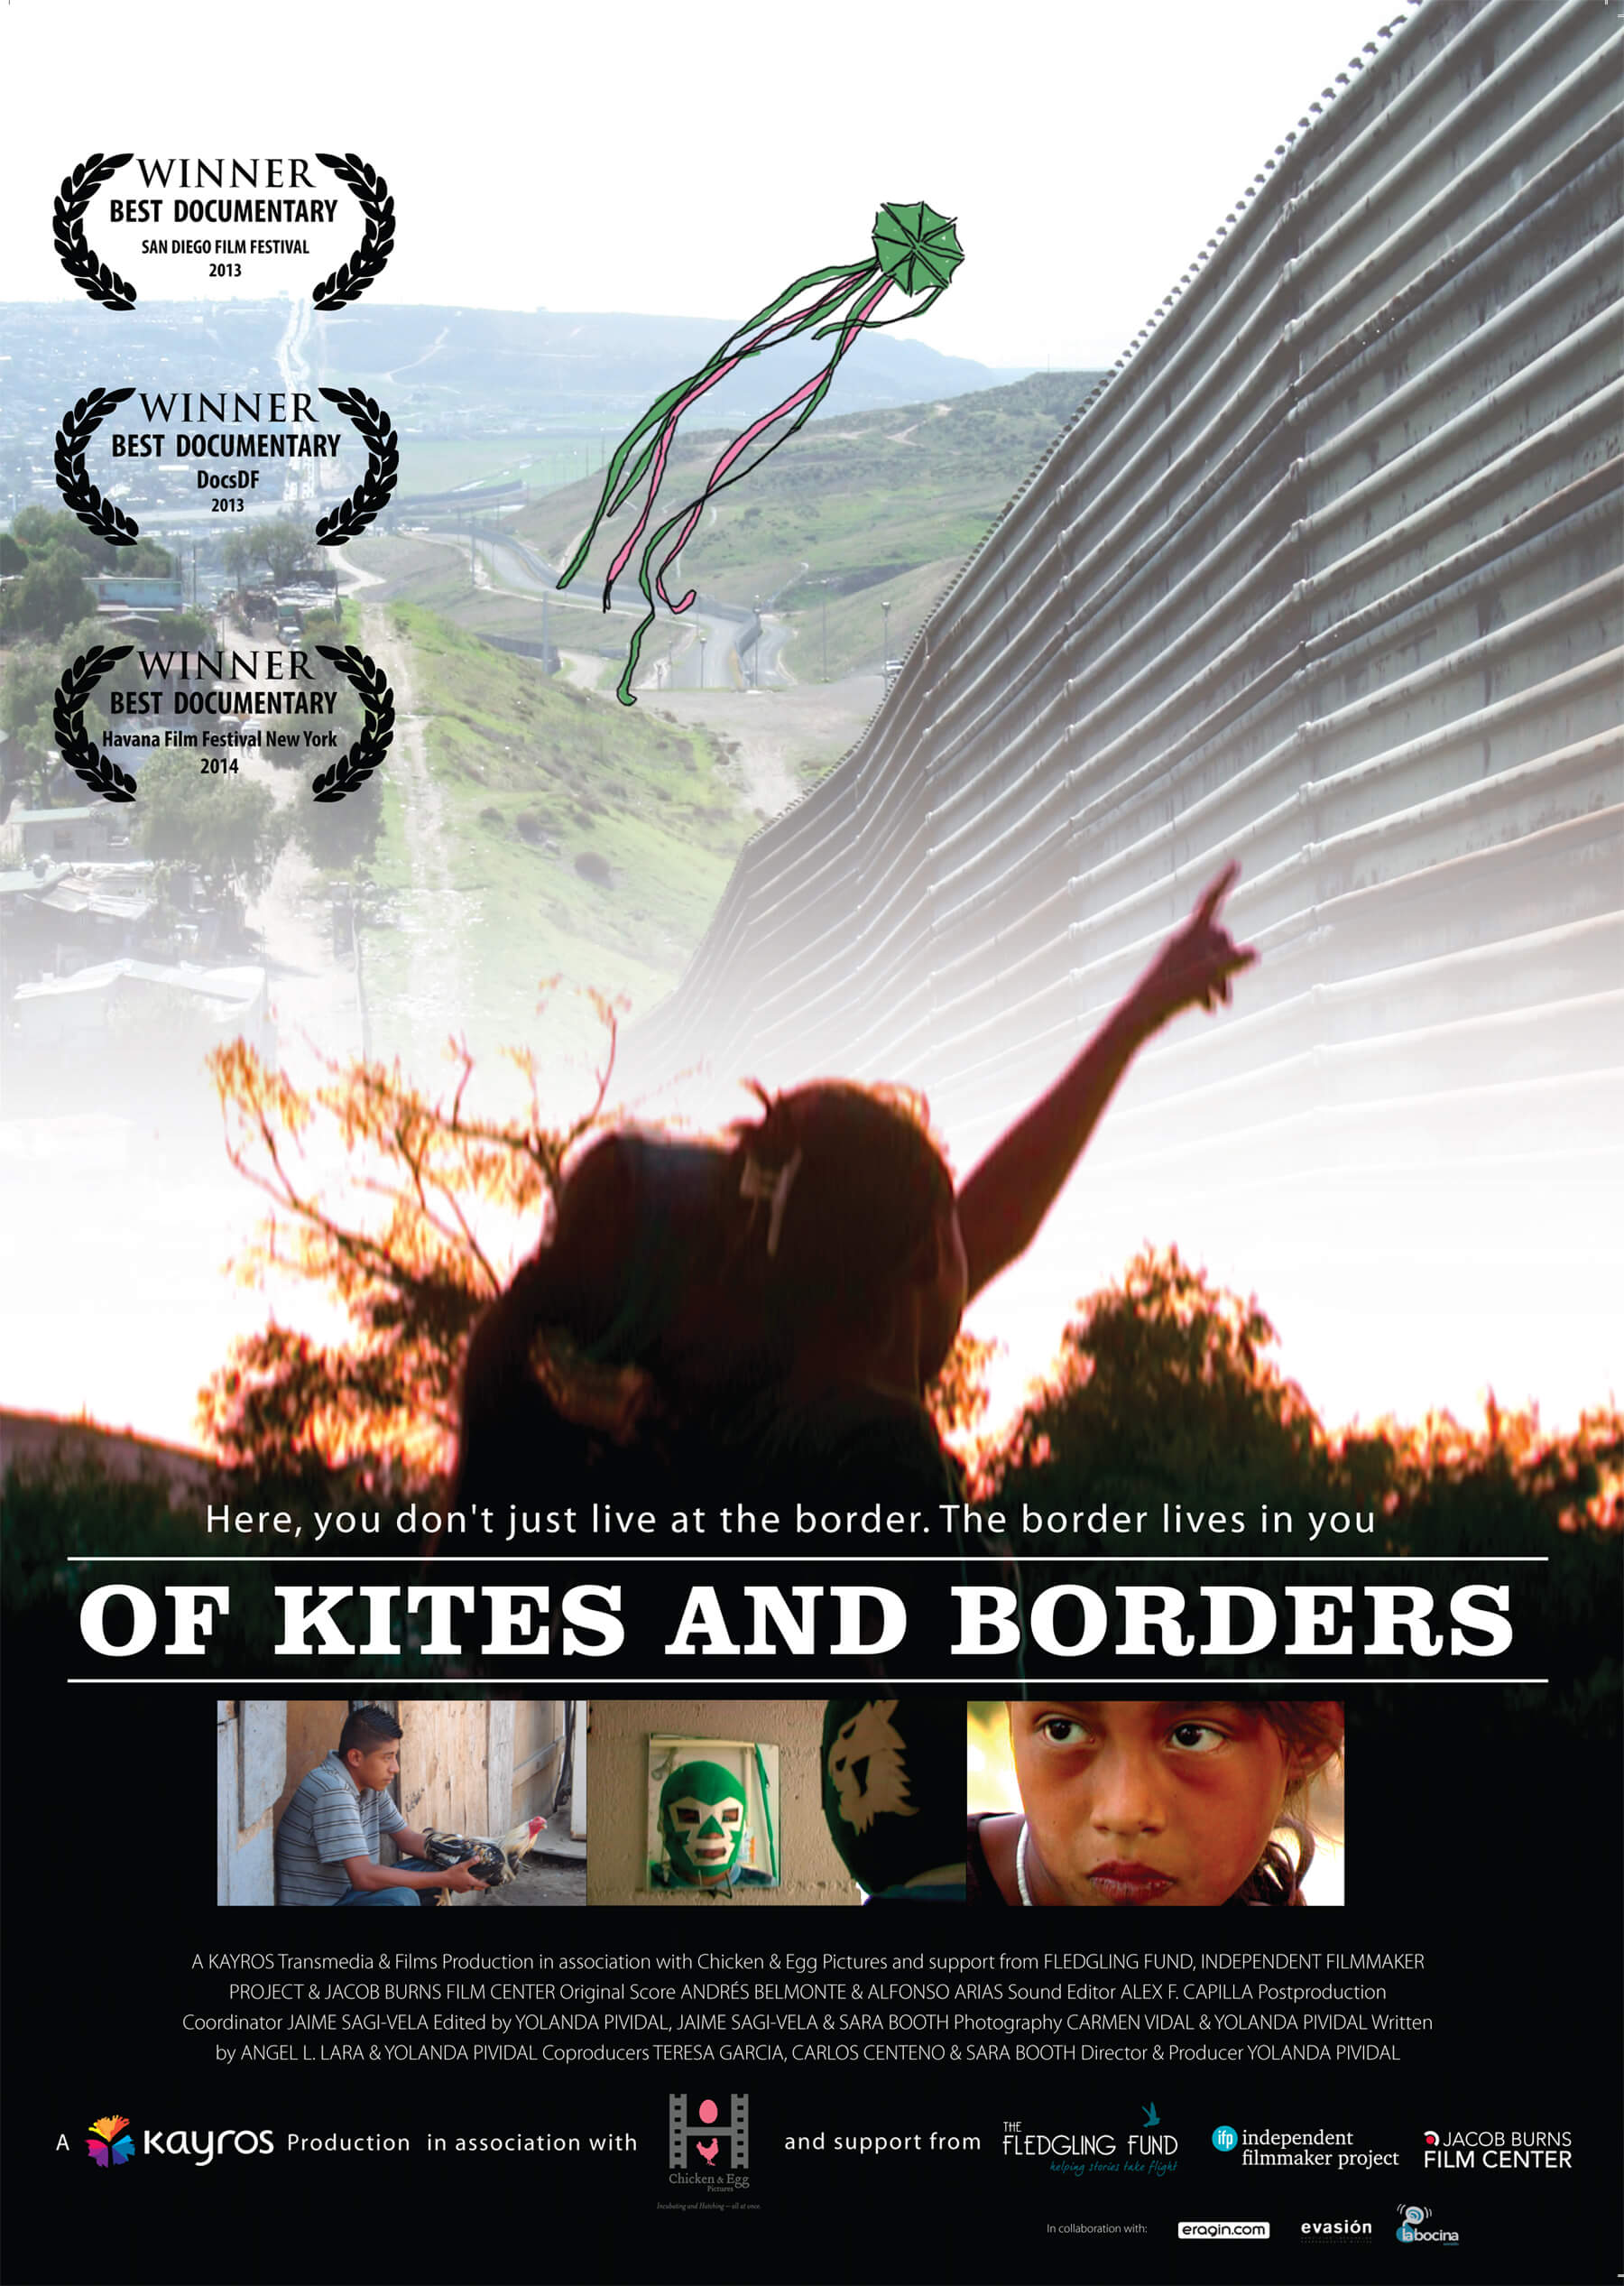 Poster of Of Kites and Borders. Above the title of the film is a women pointing up at a large fence, with a kite floating above the fence. Below the title of the film are three images, (left:) young man holding a chicken, (center:) someone looking in a mirror with a green lucha libre mask on, and (right:) close-up of a young child's face. Below the three images are the credits for the film.